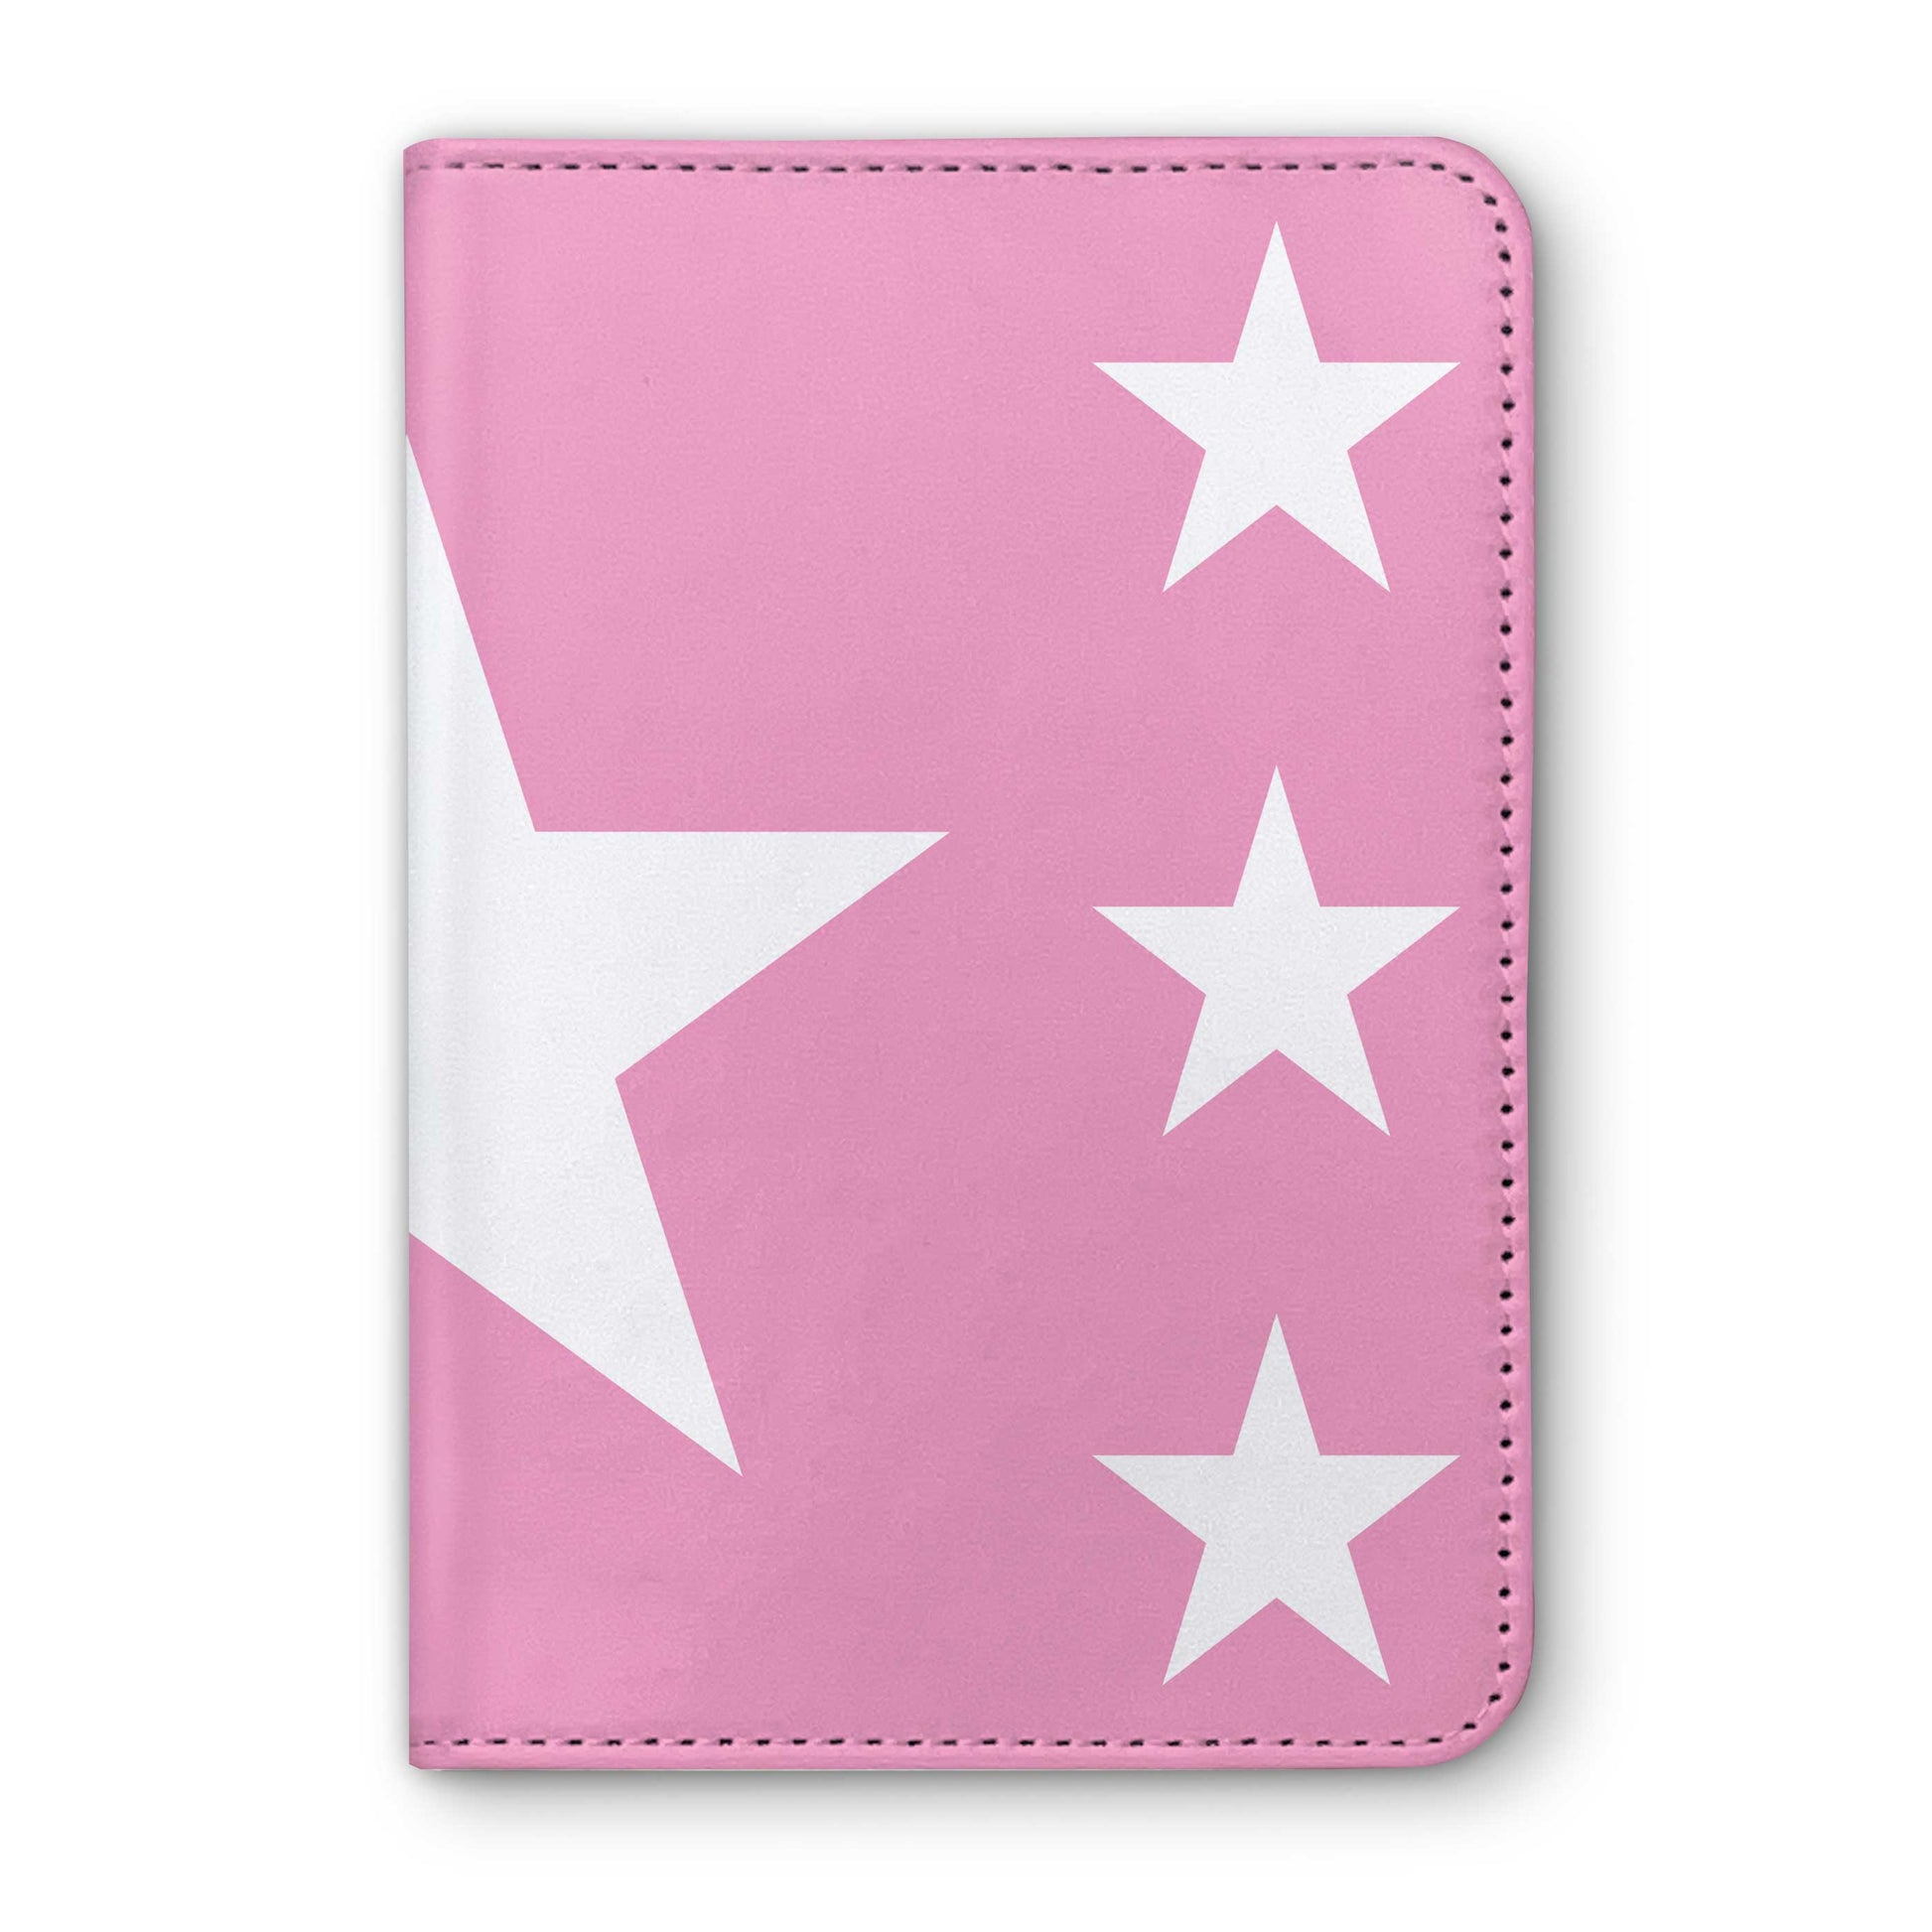 Premier Plastering (uk) Limited Horse Racing Passport Holder - Hacked Up Horse Racing Gifts